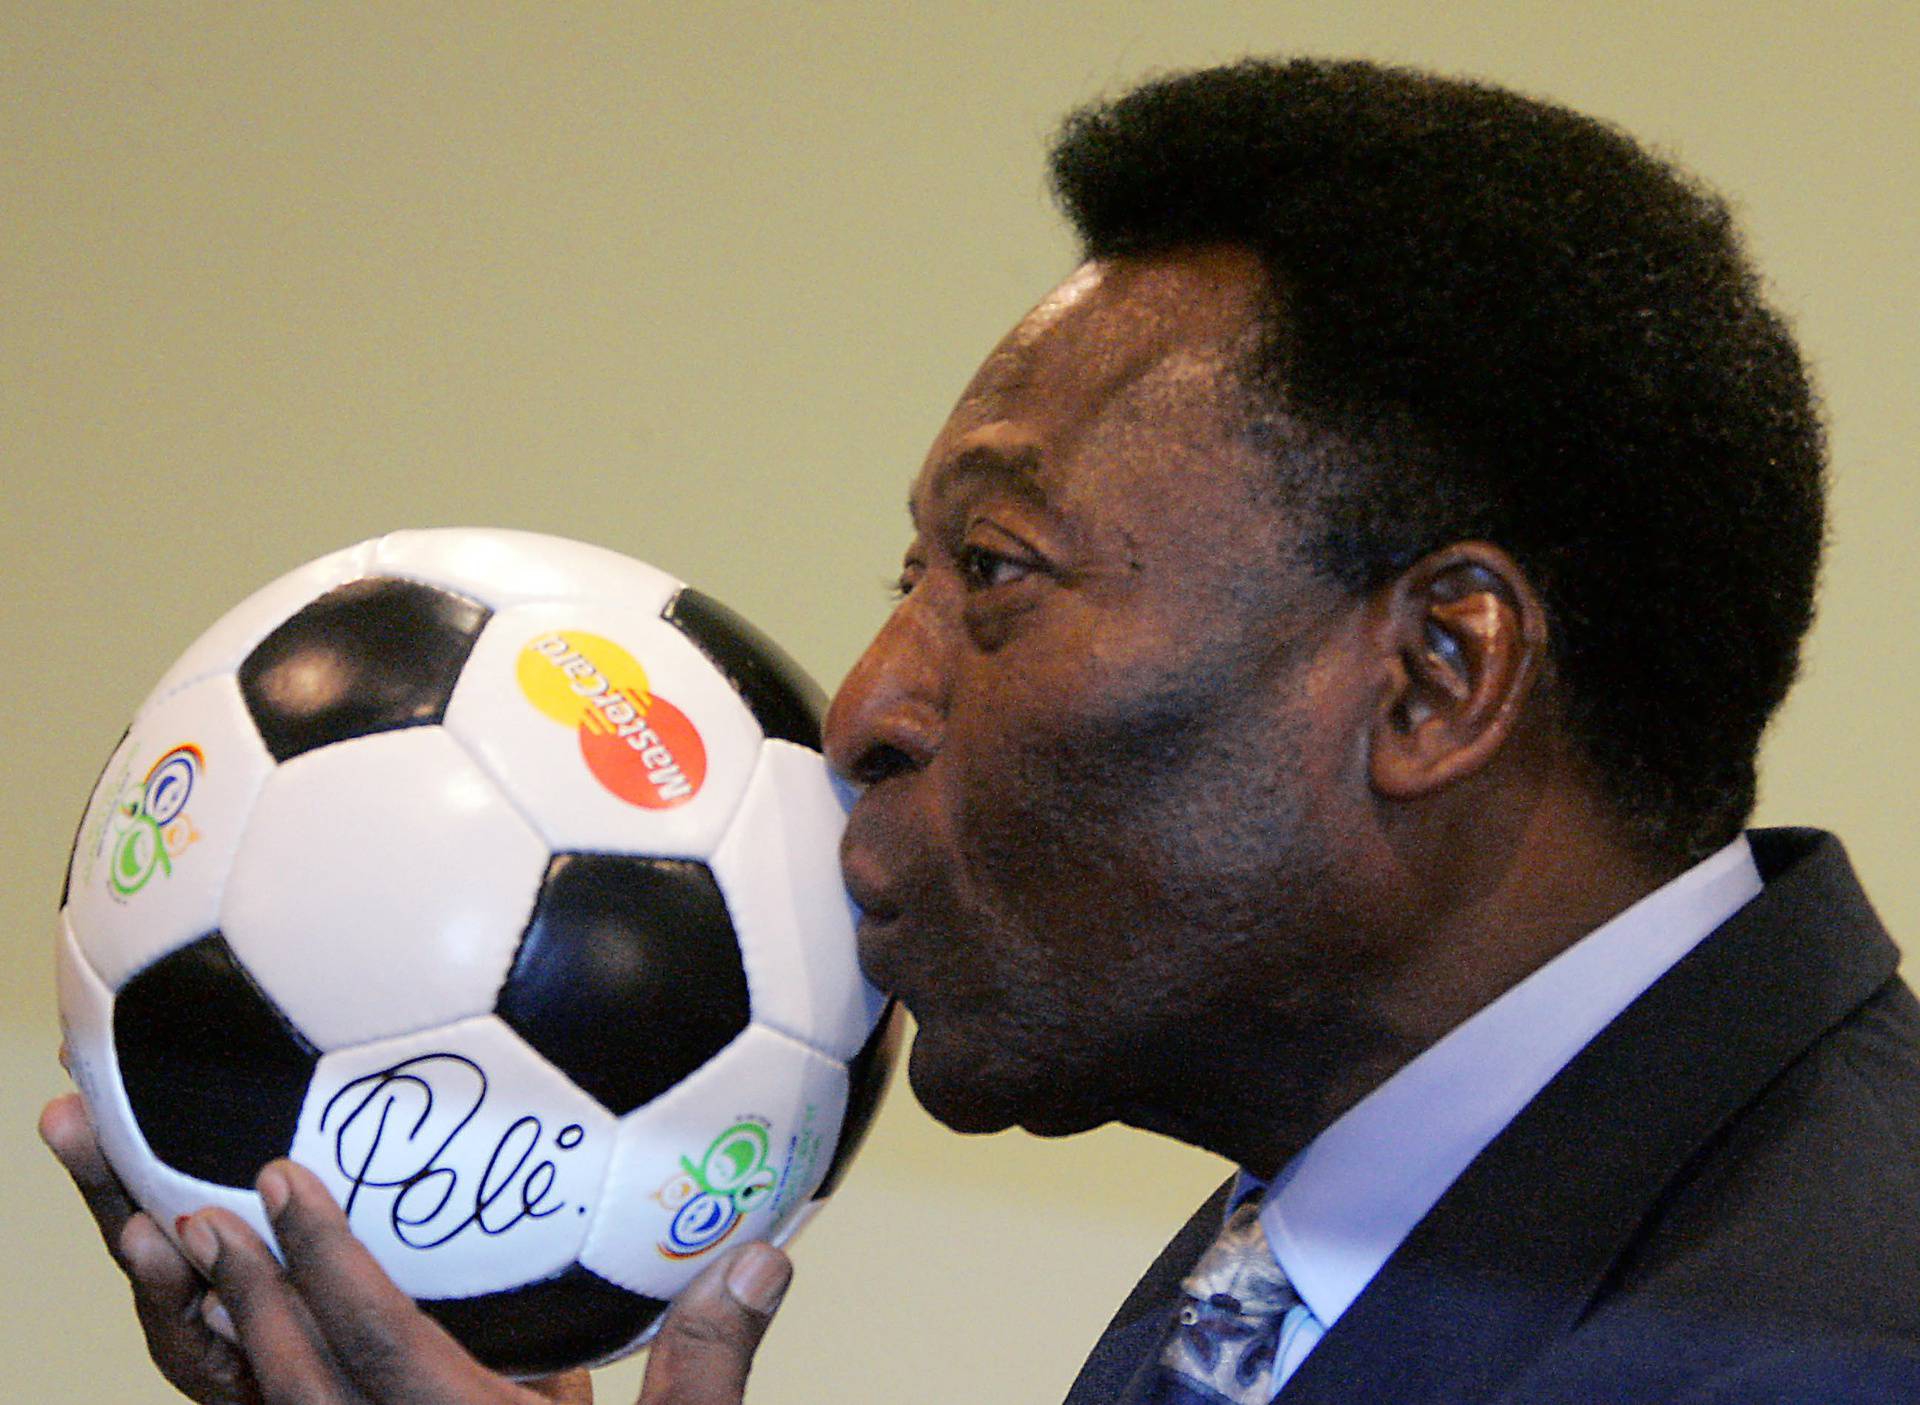 'Pele forever' Germany premiere